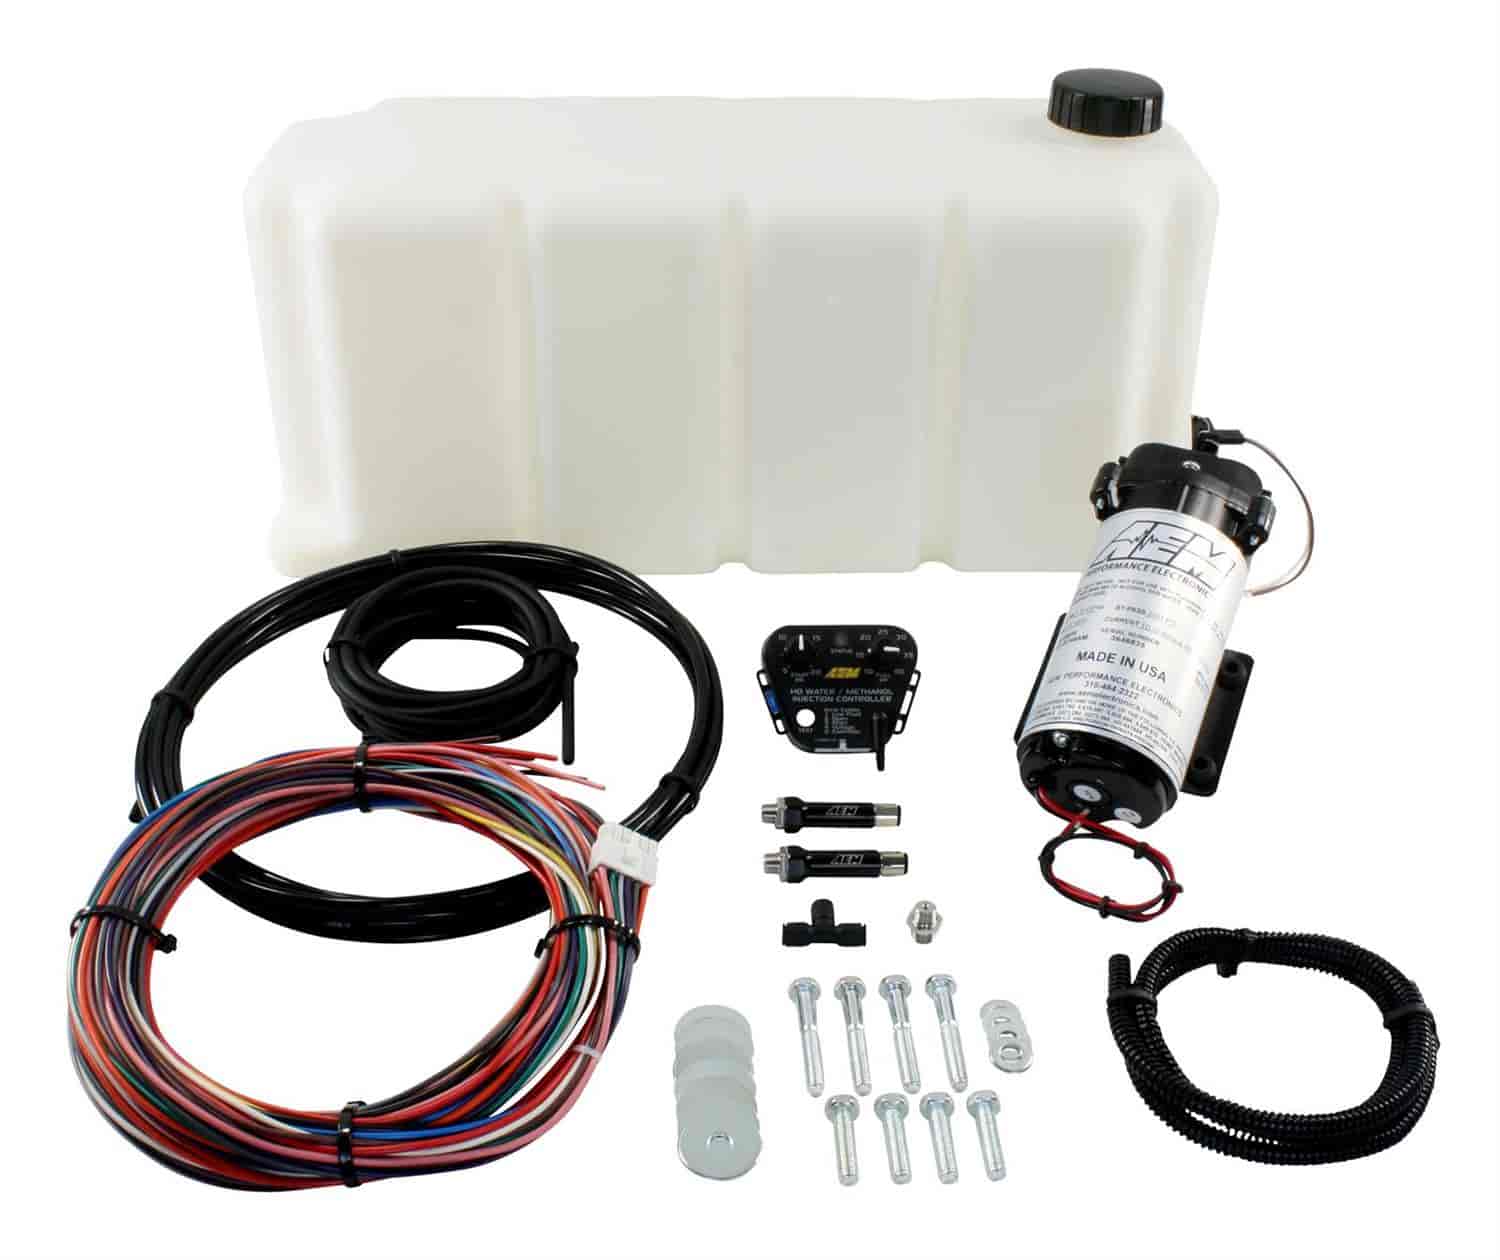 V2 Water/Methanol Injection Kit Includes: HD Controller For Internal MAP With 40psi Max